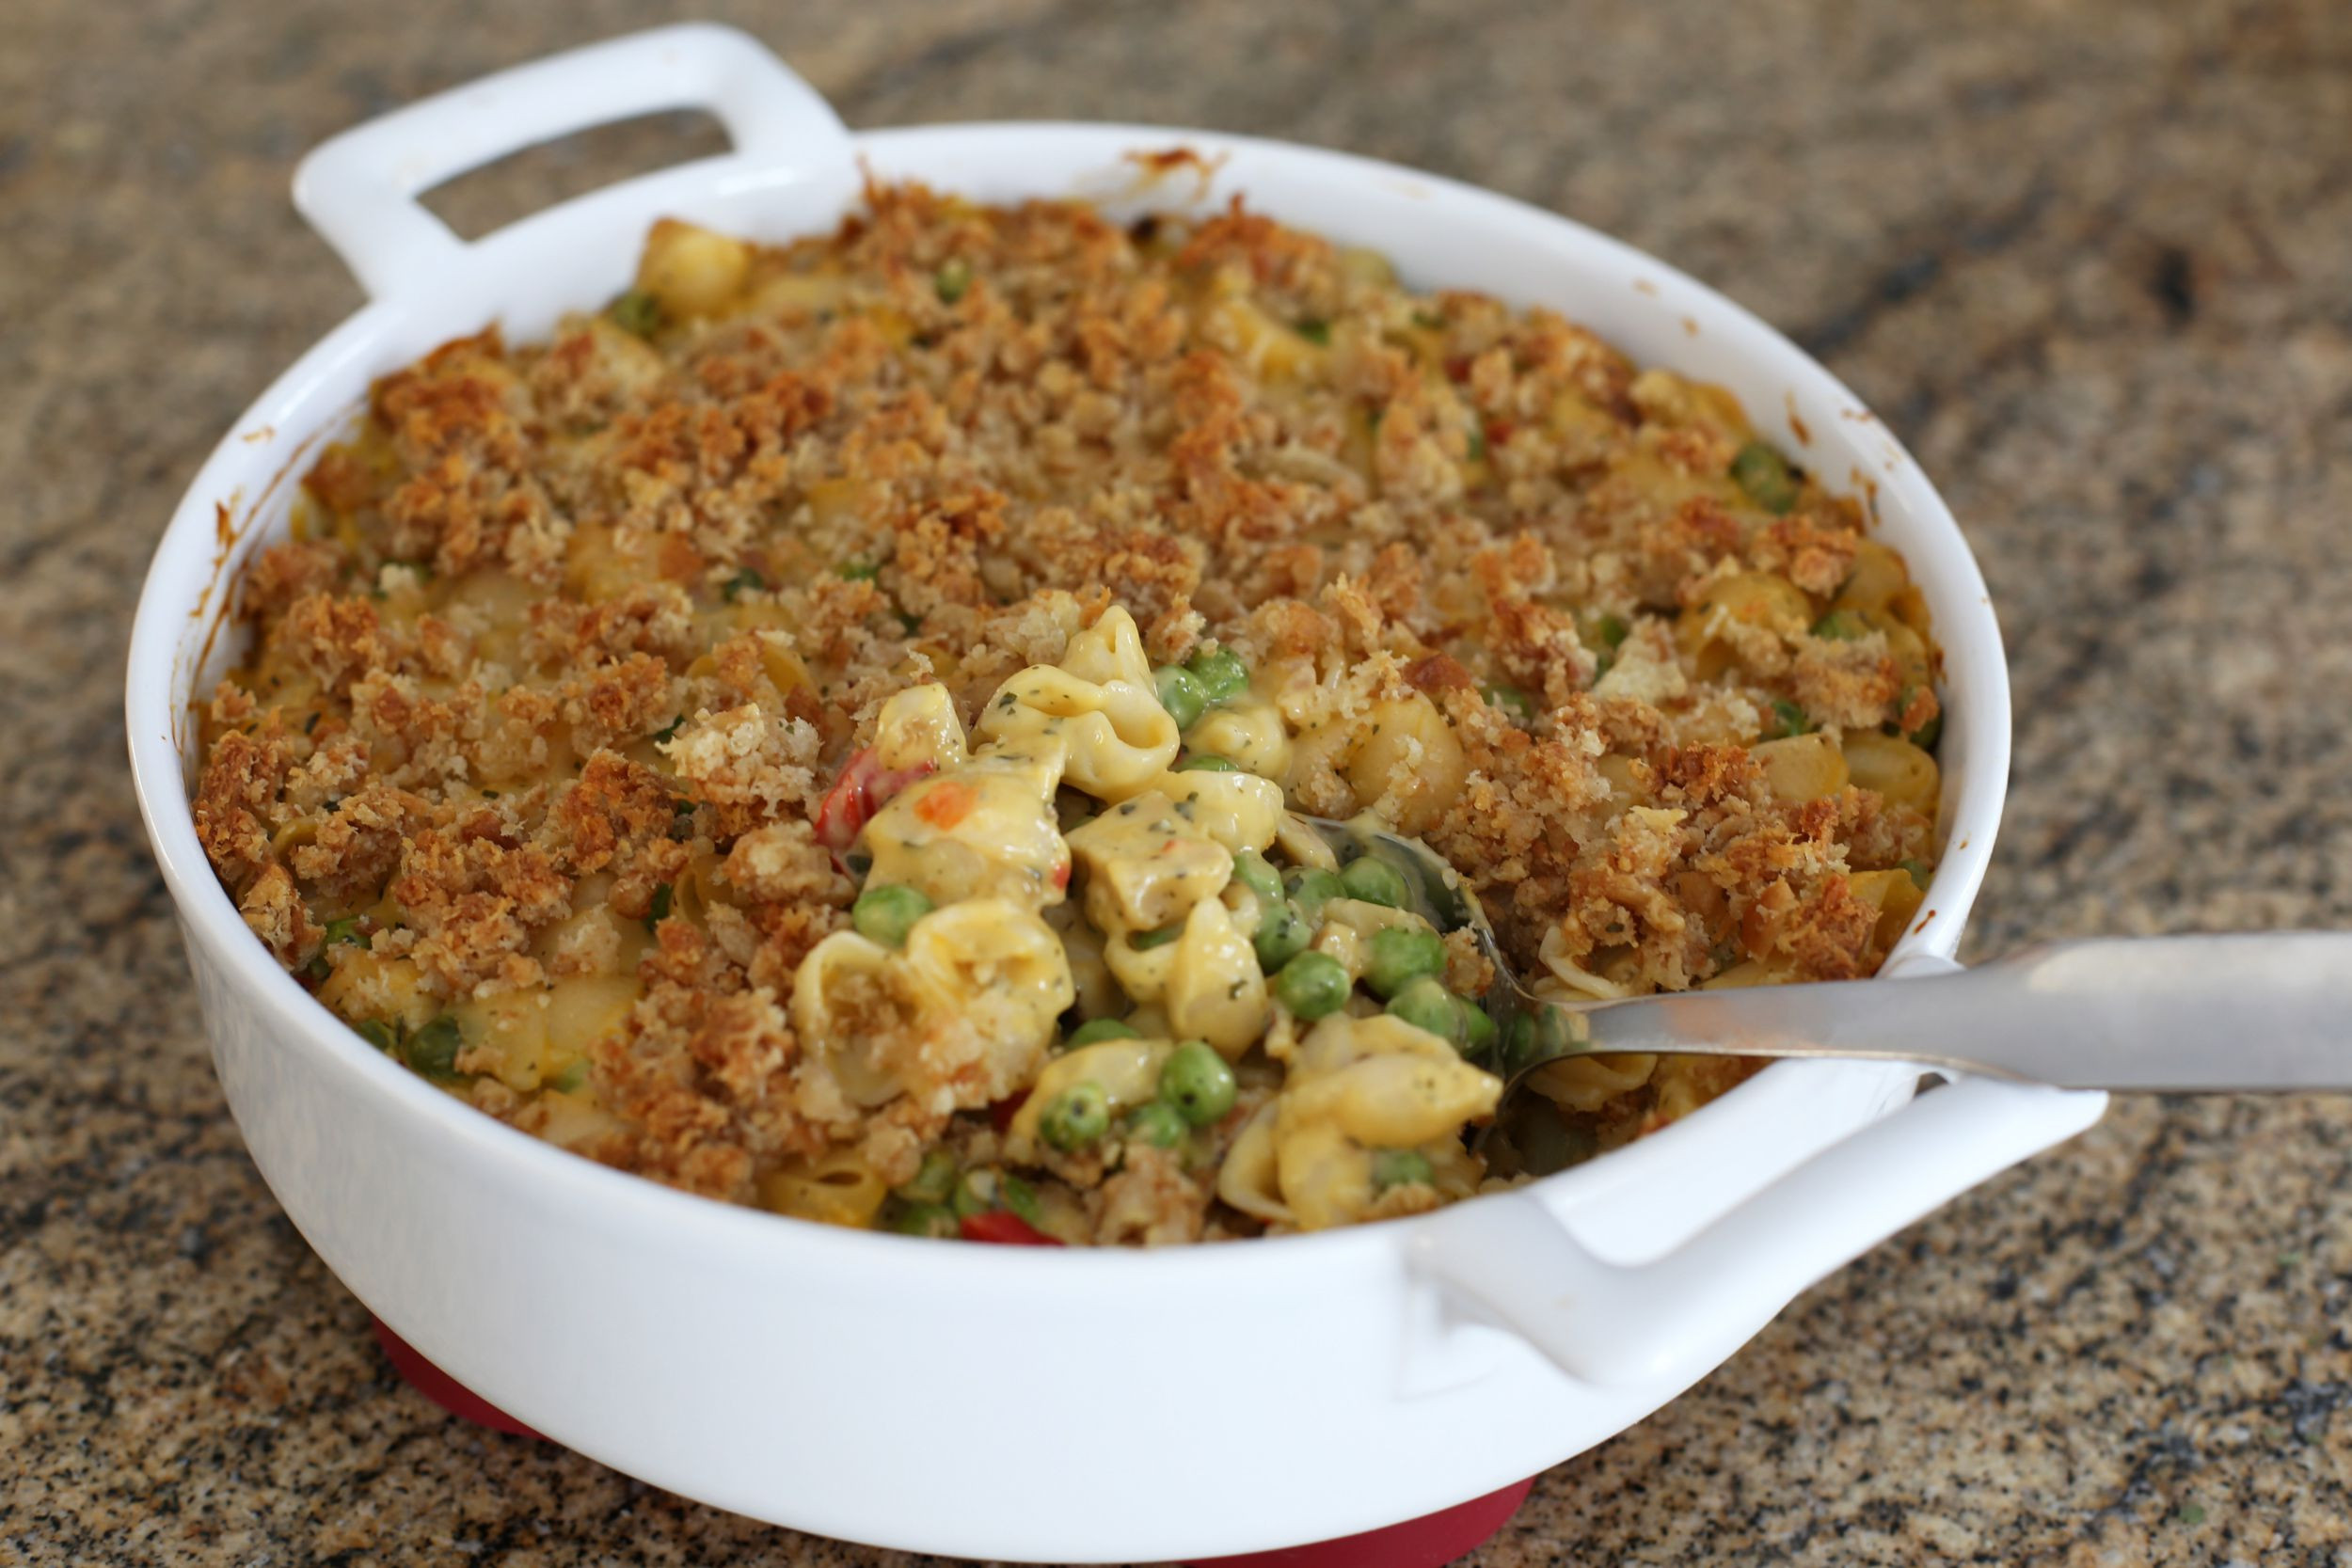 Macaroni And Cheese Casserole With Chicken
 Easy Chicken Macaroni and Cheese Casserole Recipe